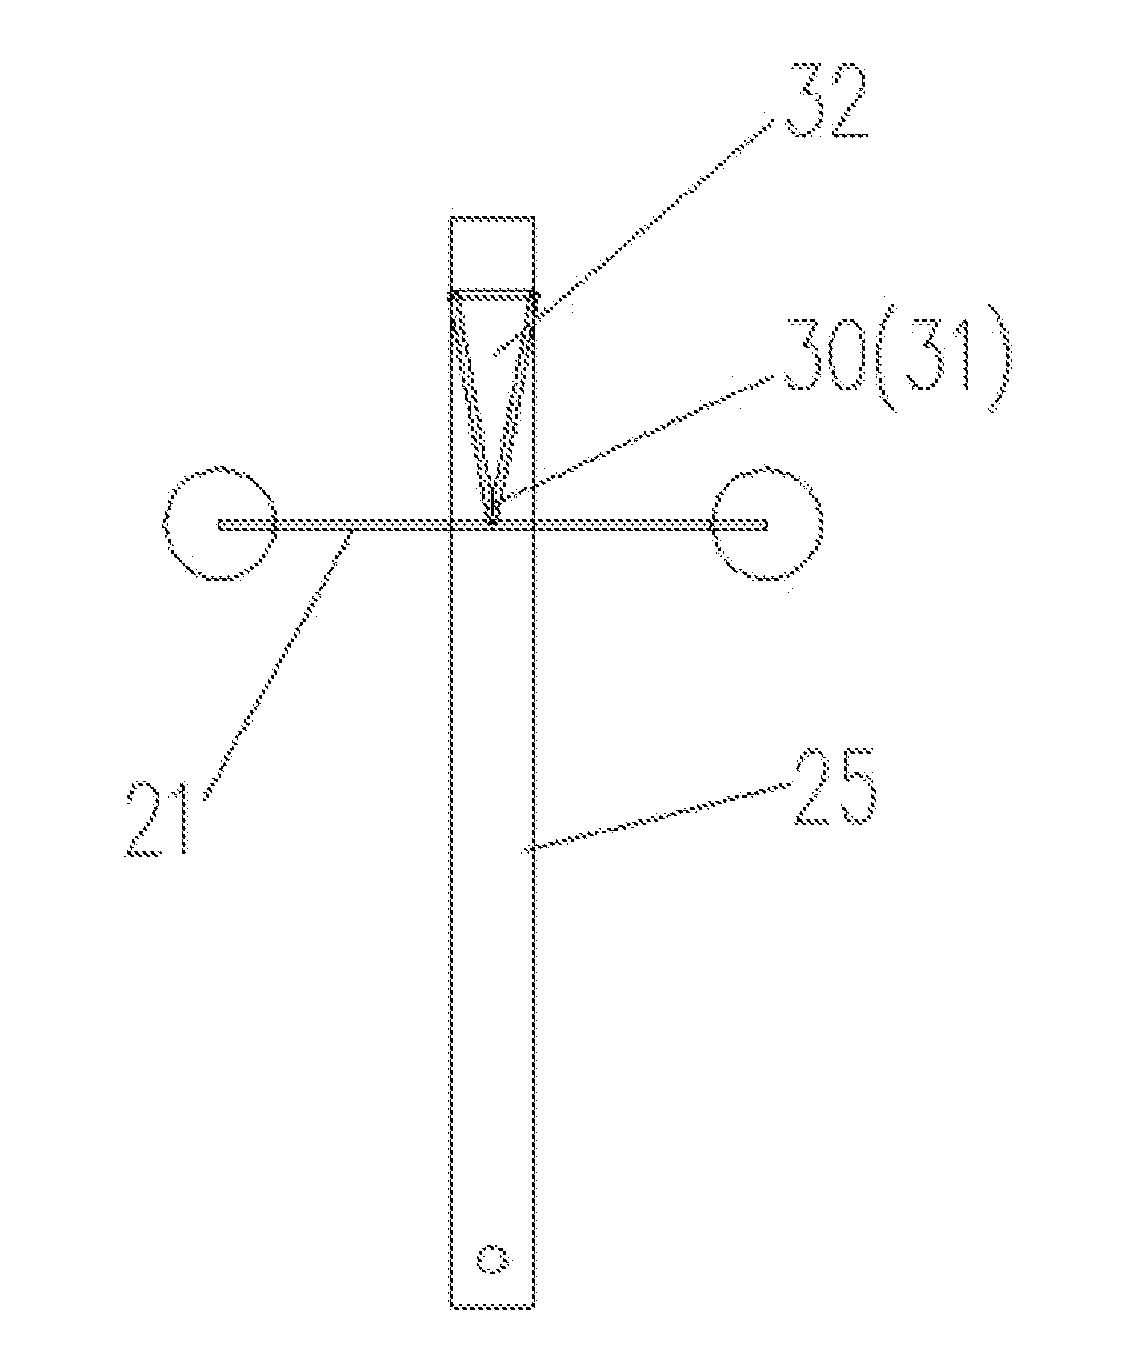 Bridge maintenance vehicle with hinge-connected type hanging bracket and capable of avoiding bridge-side obstacles